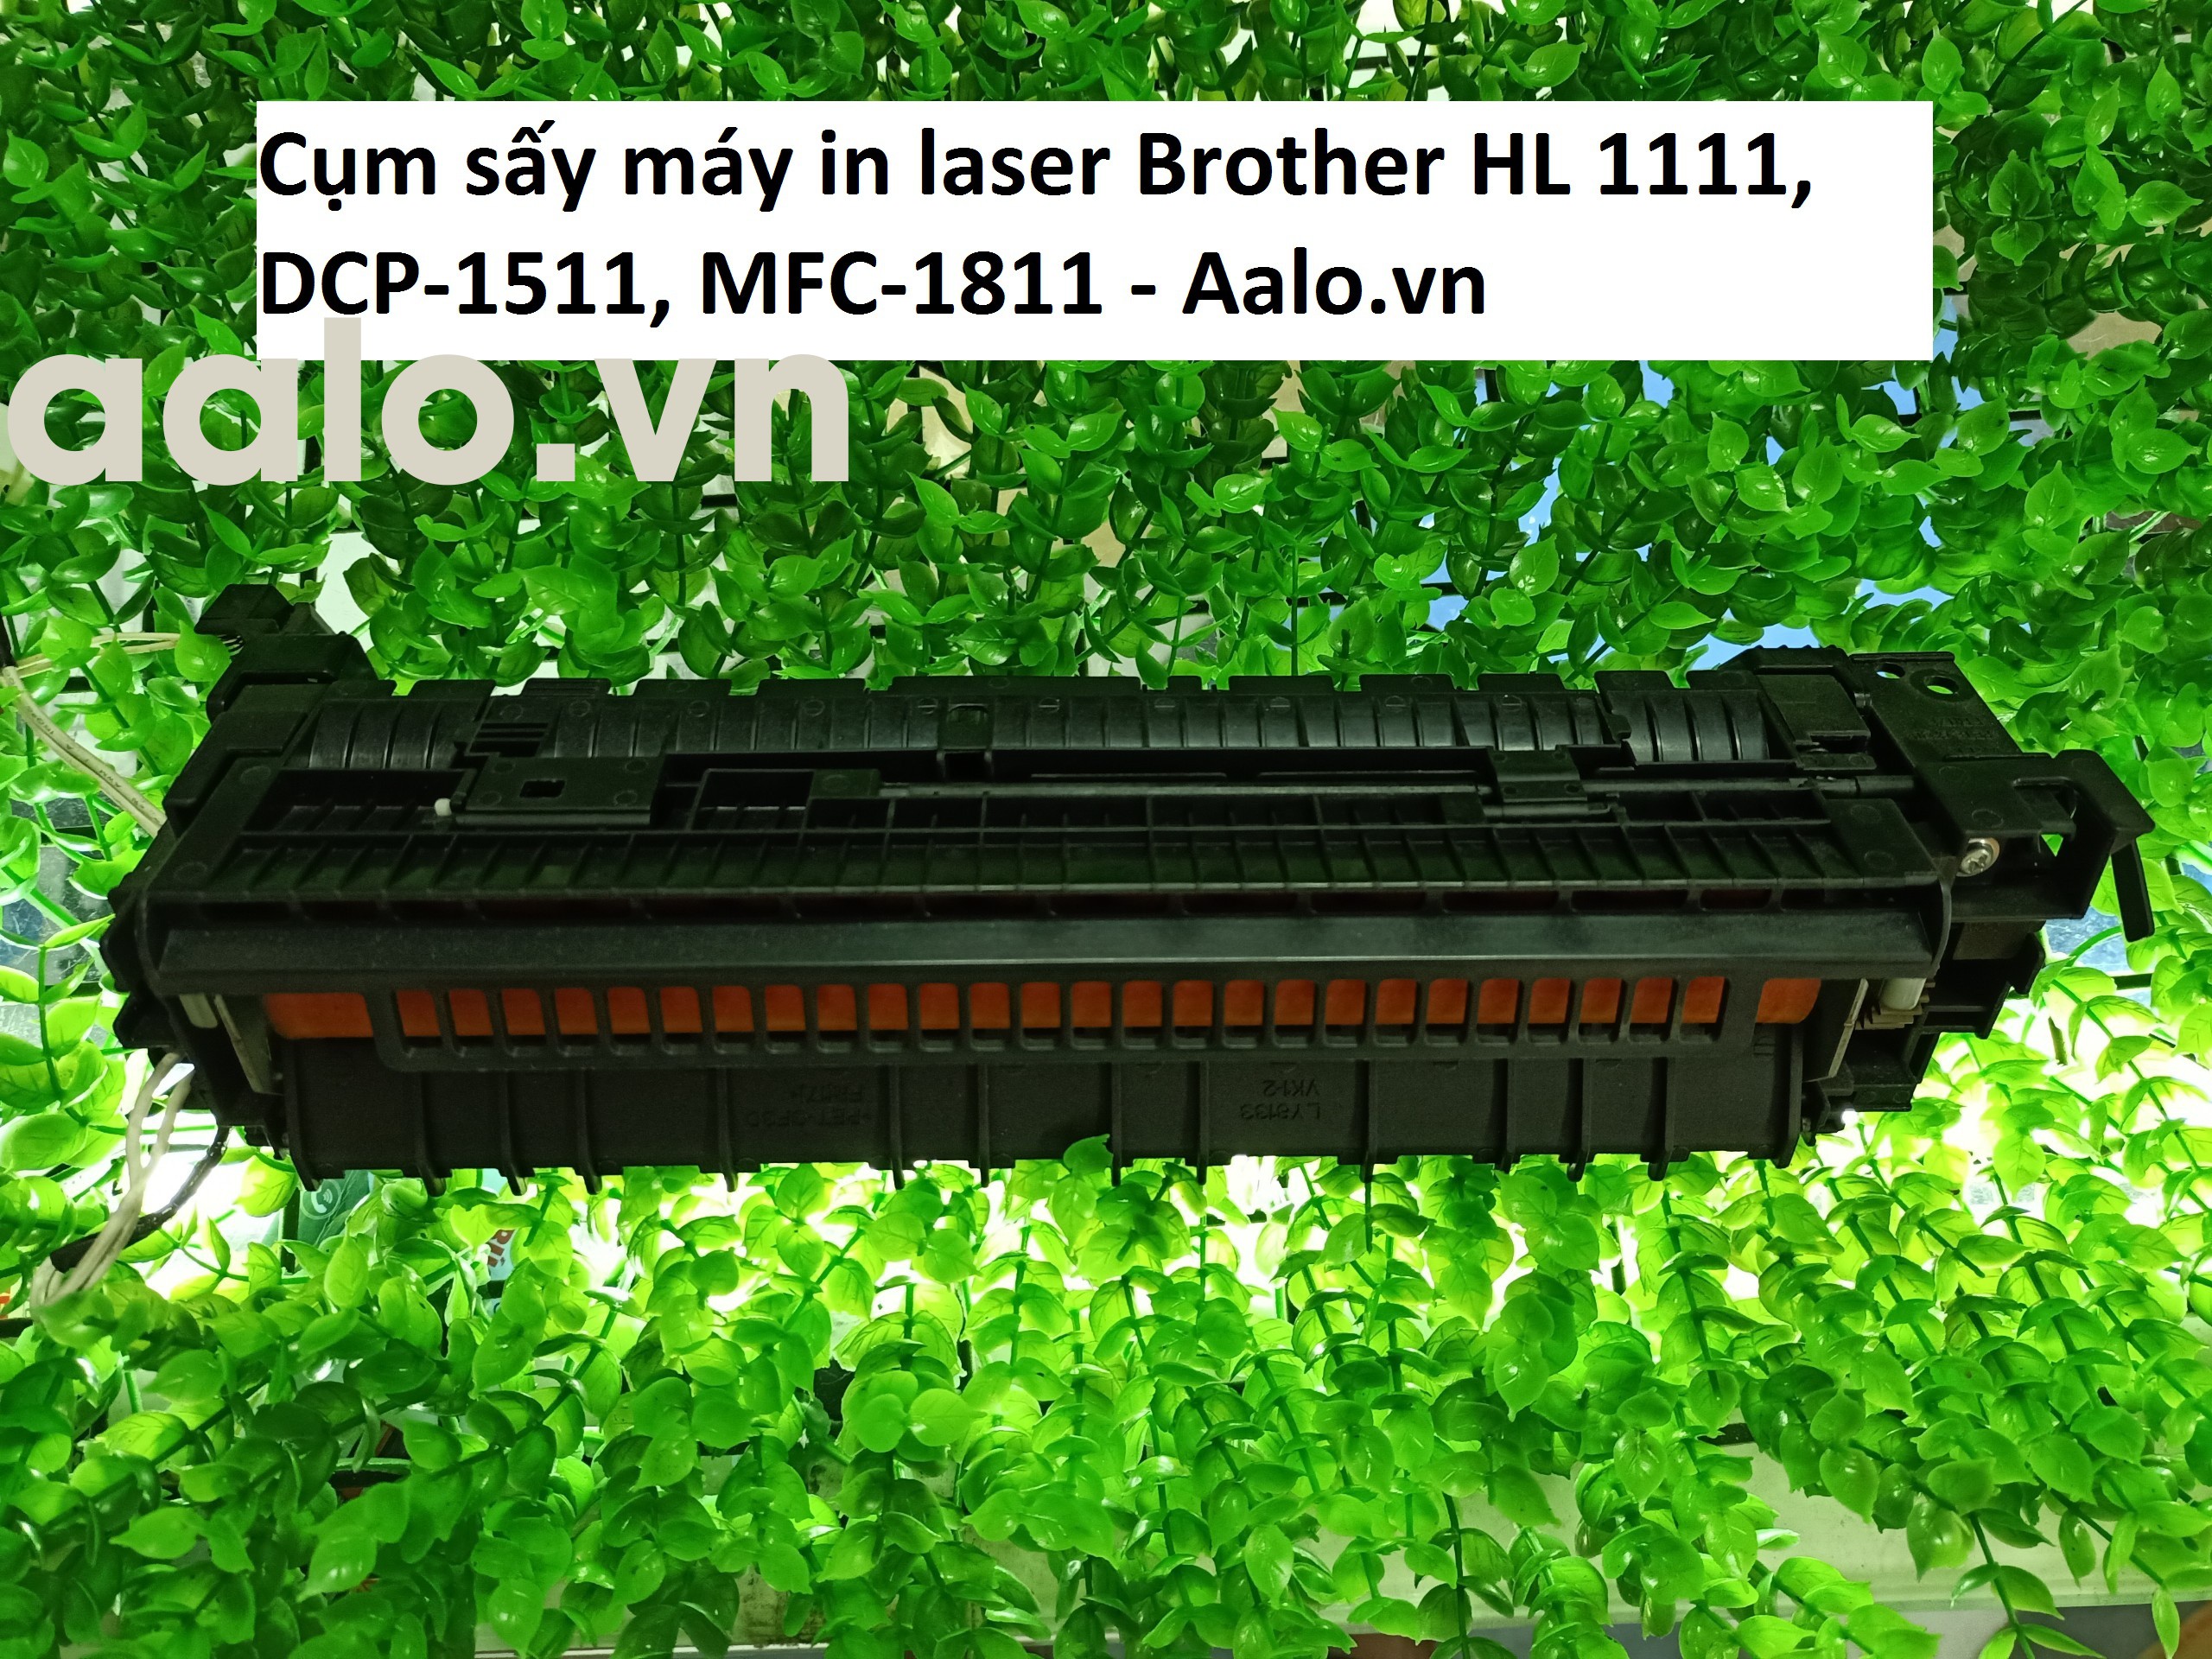 Cụm sấy máy in laser Brother HL 1111, DCP-1511, MFC-1811